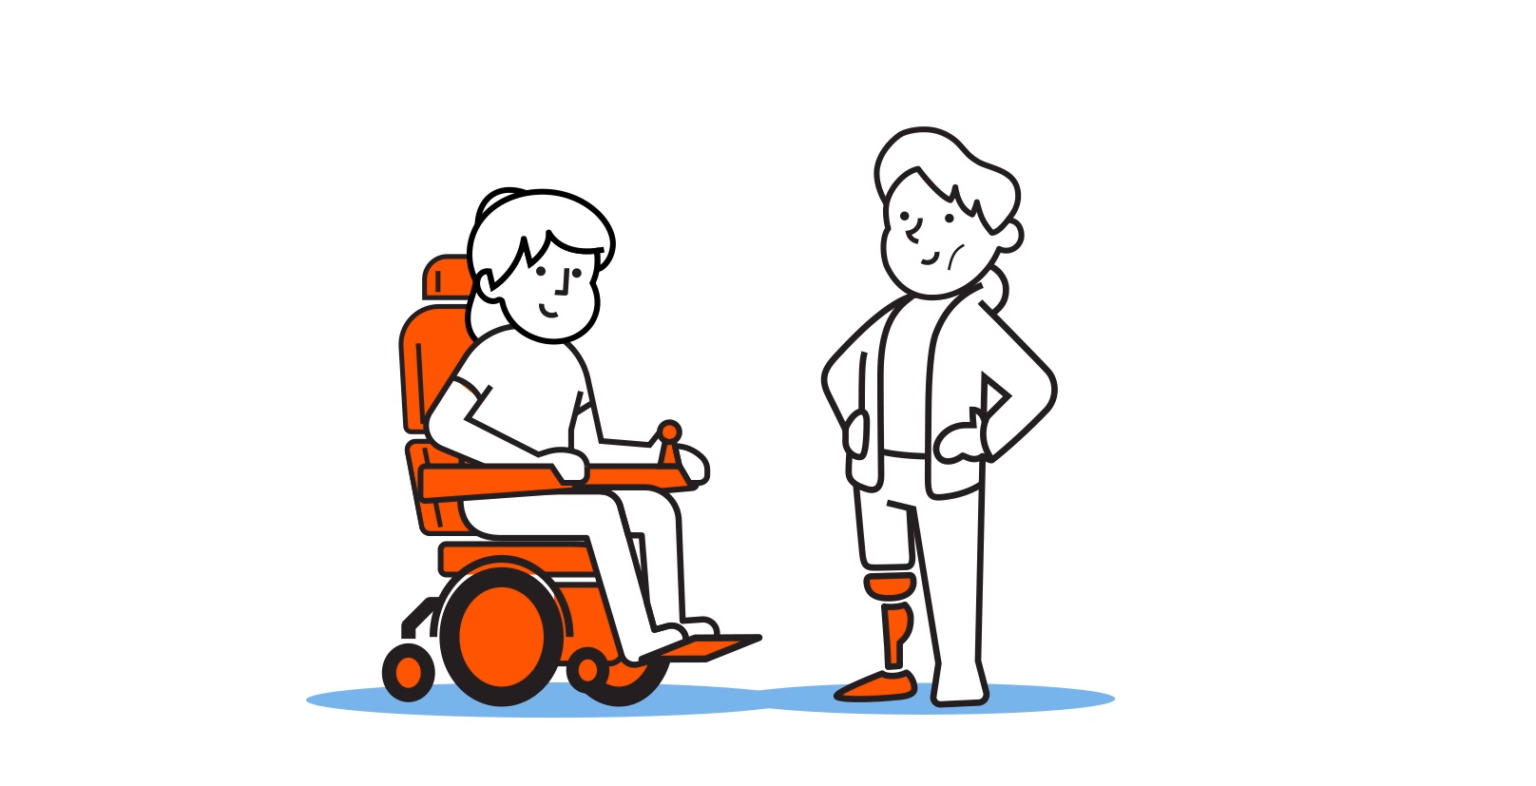 ‘Assistive Technology For All’ campaign video